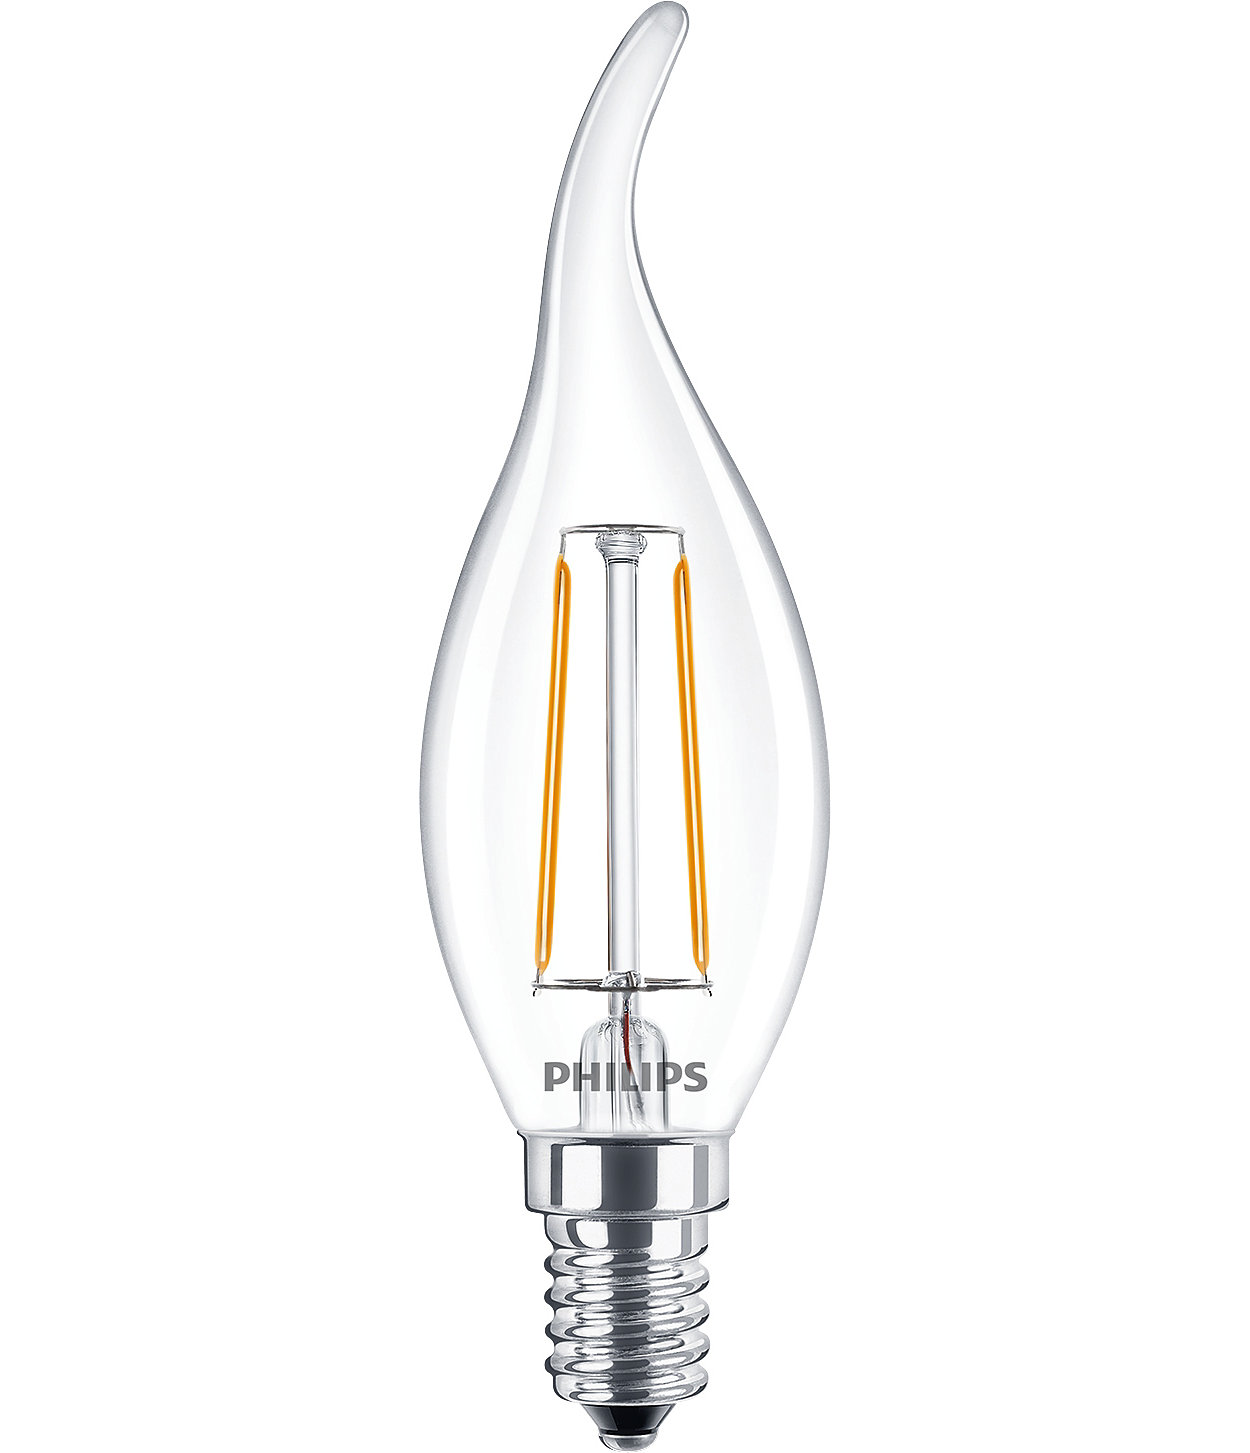 For your everyday lighting jobs, candle LEDs features a classic heritage design with the benefits of long-lasting LED technology